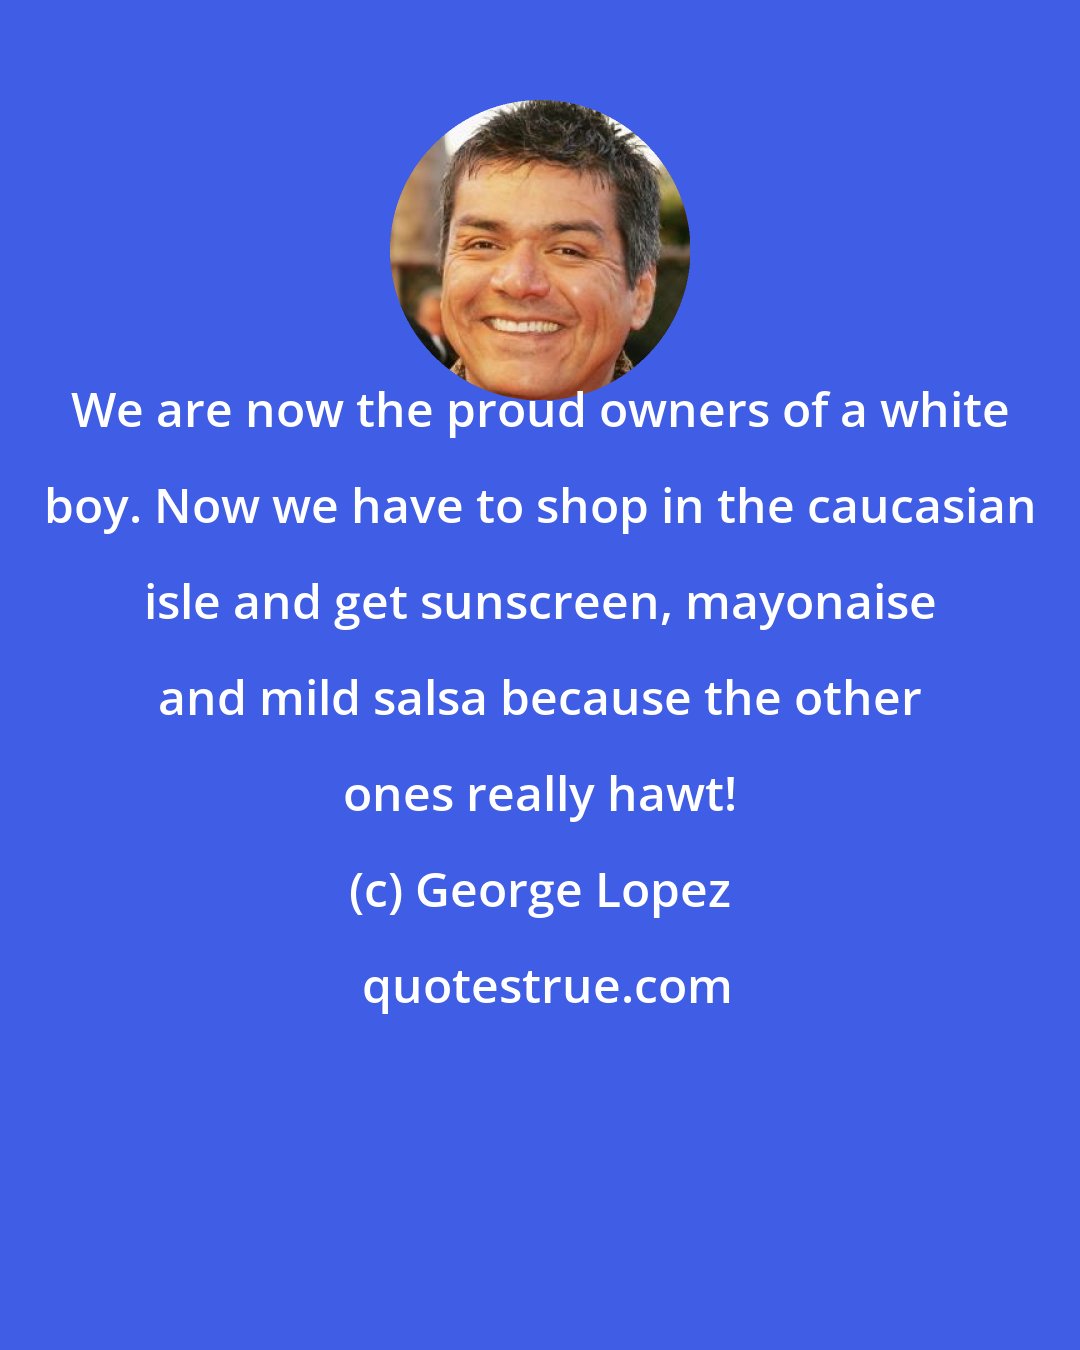 George Lopez: We are now the proud owners of a white boy. Now we have to shop in the caucasian isle and get sunscreen, mayonaise and mild salsa because the other ones really hawt!